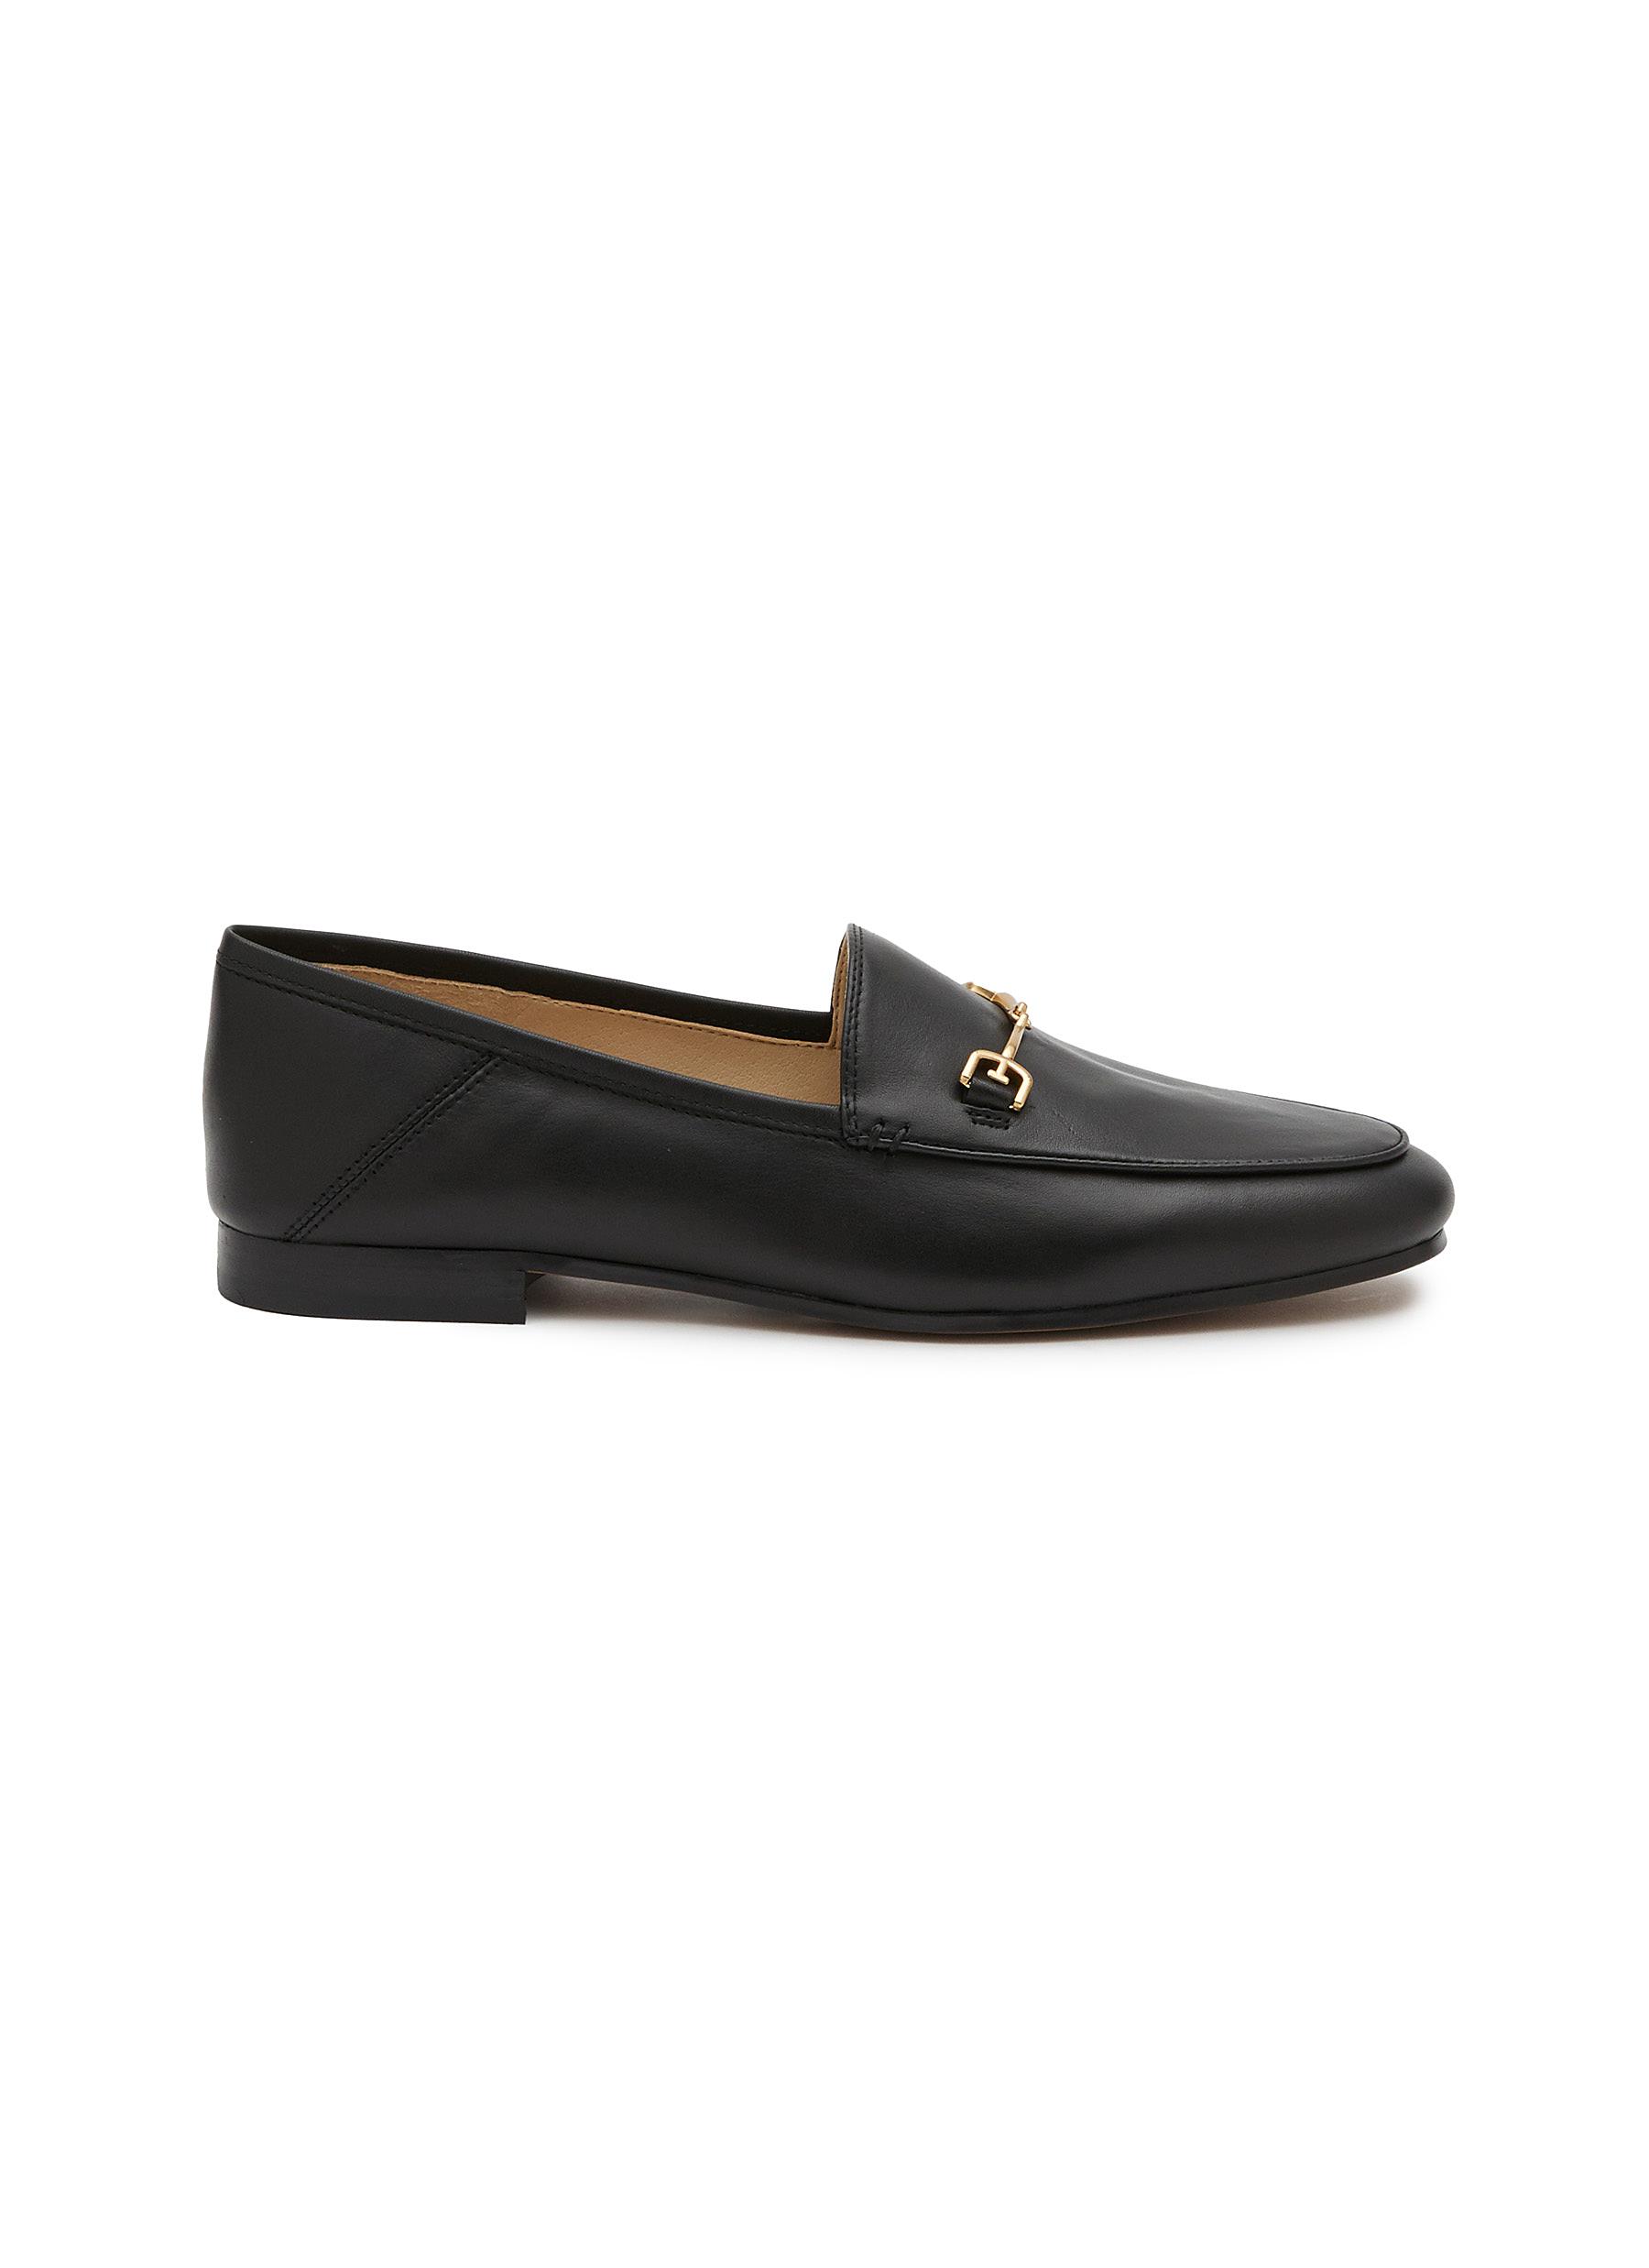 Loraine’ horsebit leather step-in loafer